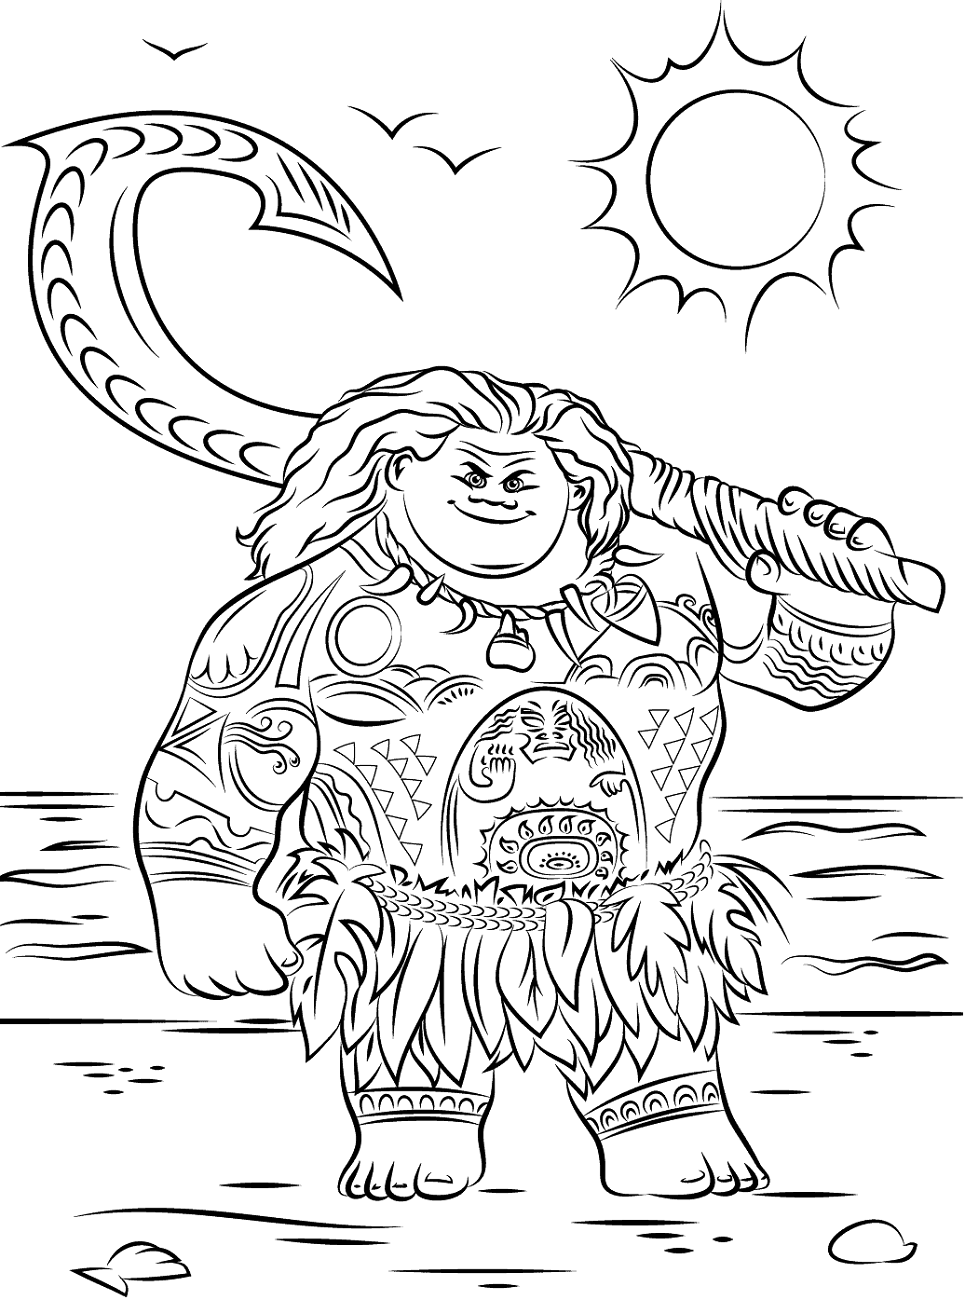 Strong Maui Coloring Page - Free Printable Coloring Pages for Kids